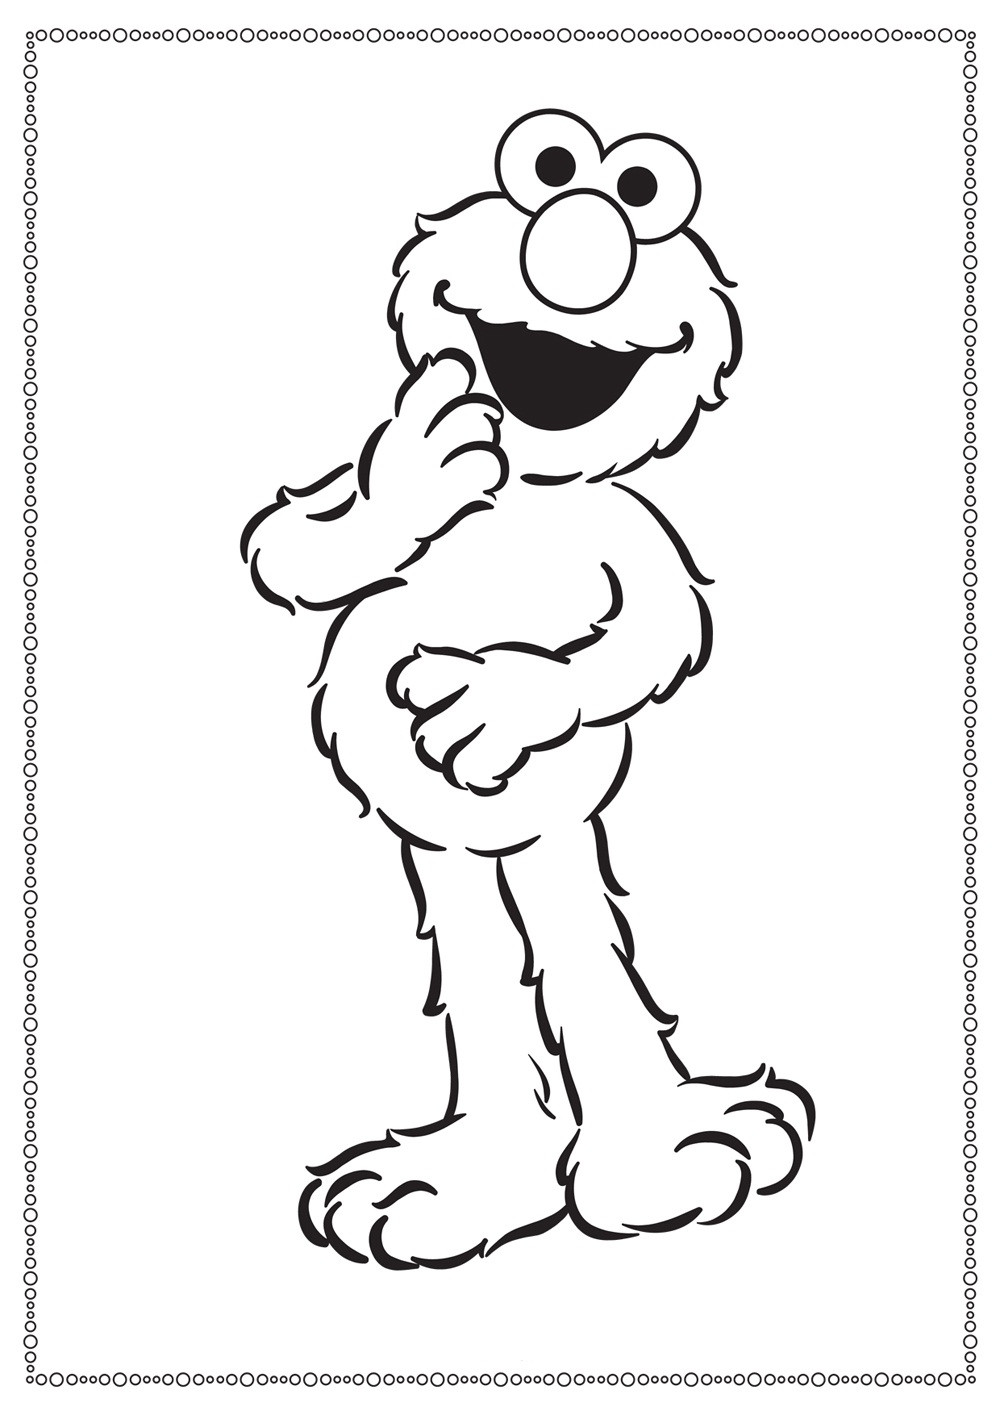 Printable Coloring Pages For Toddlers
 Free Printable Elmo Coloring Pages For Kids